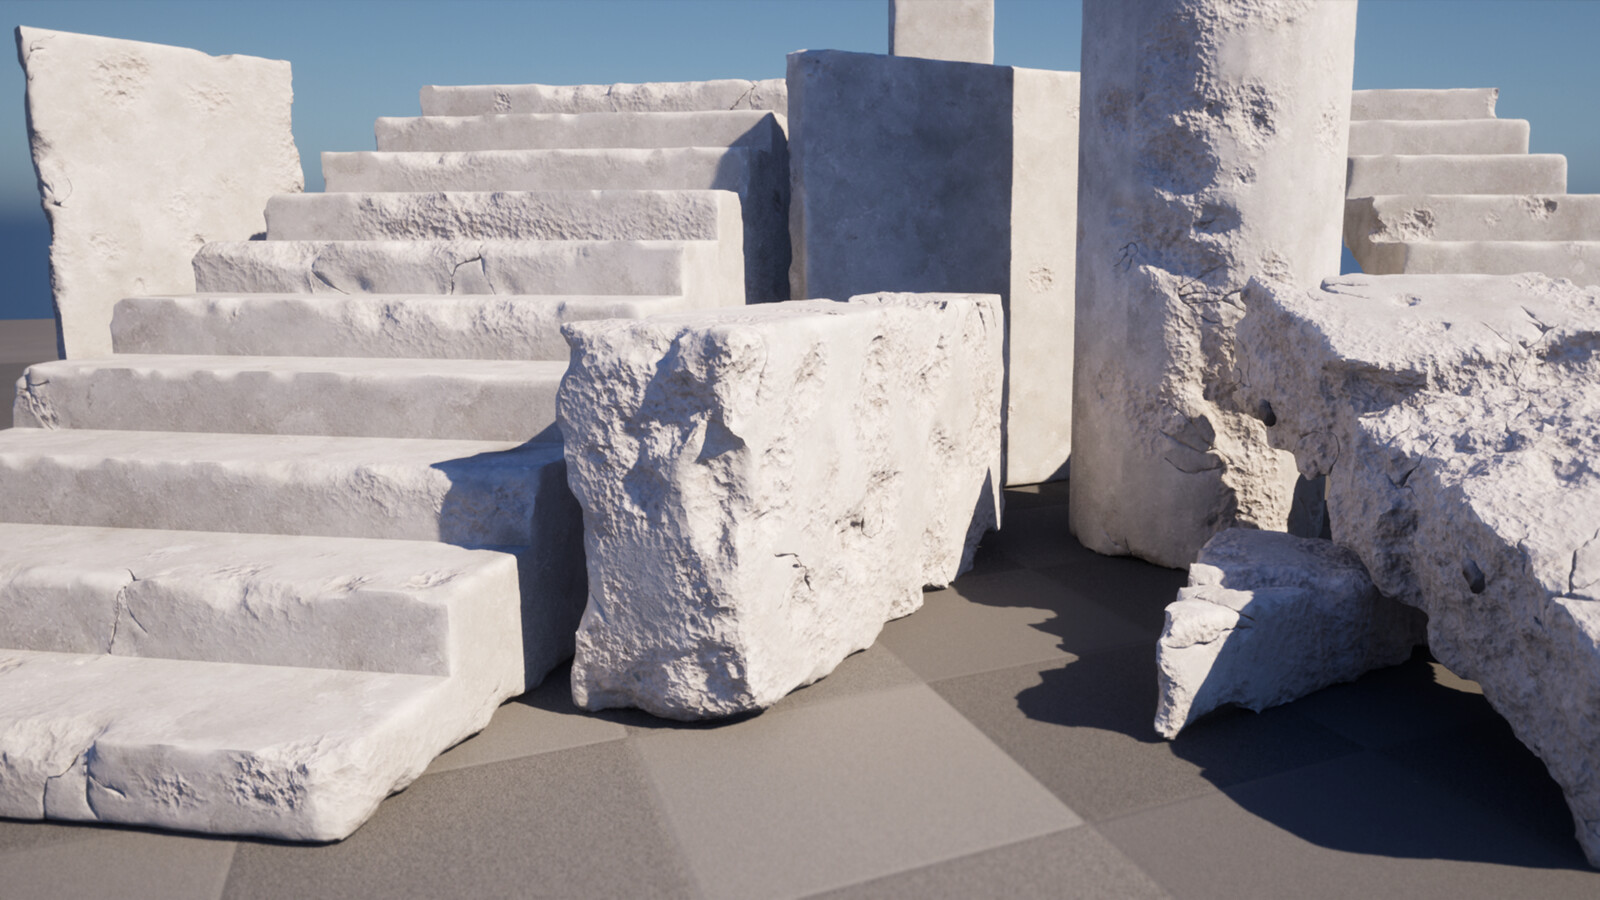 The Nanite meshes and 2-blend material in Unreal 5